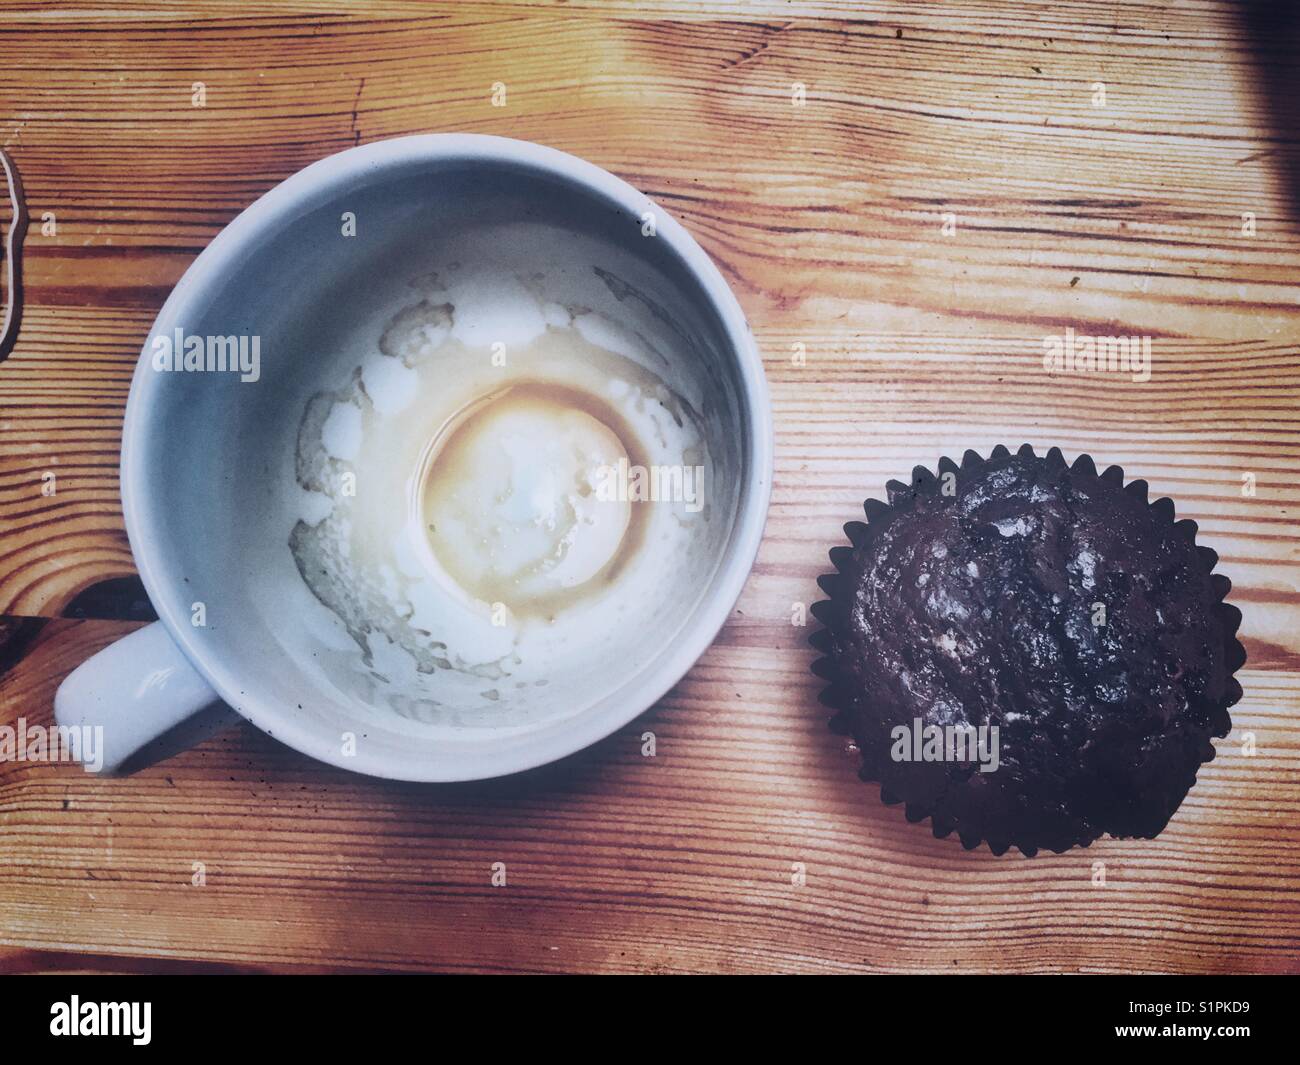 Chocolate muffin and an empty coffee cup. Stock Photo